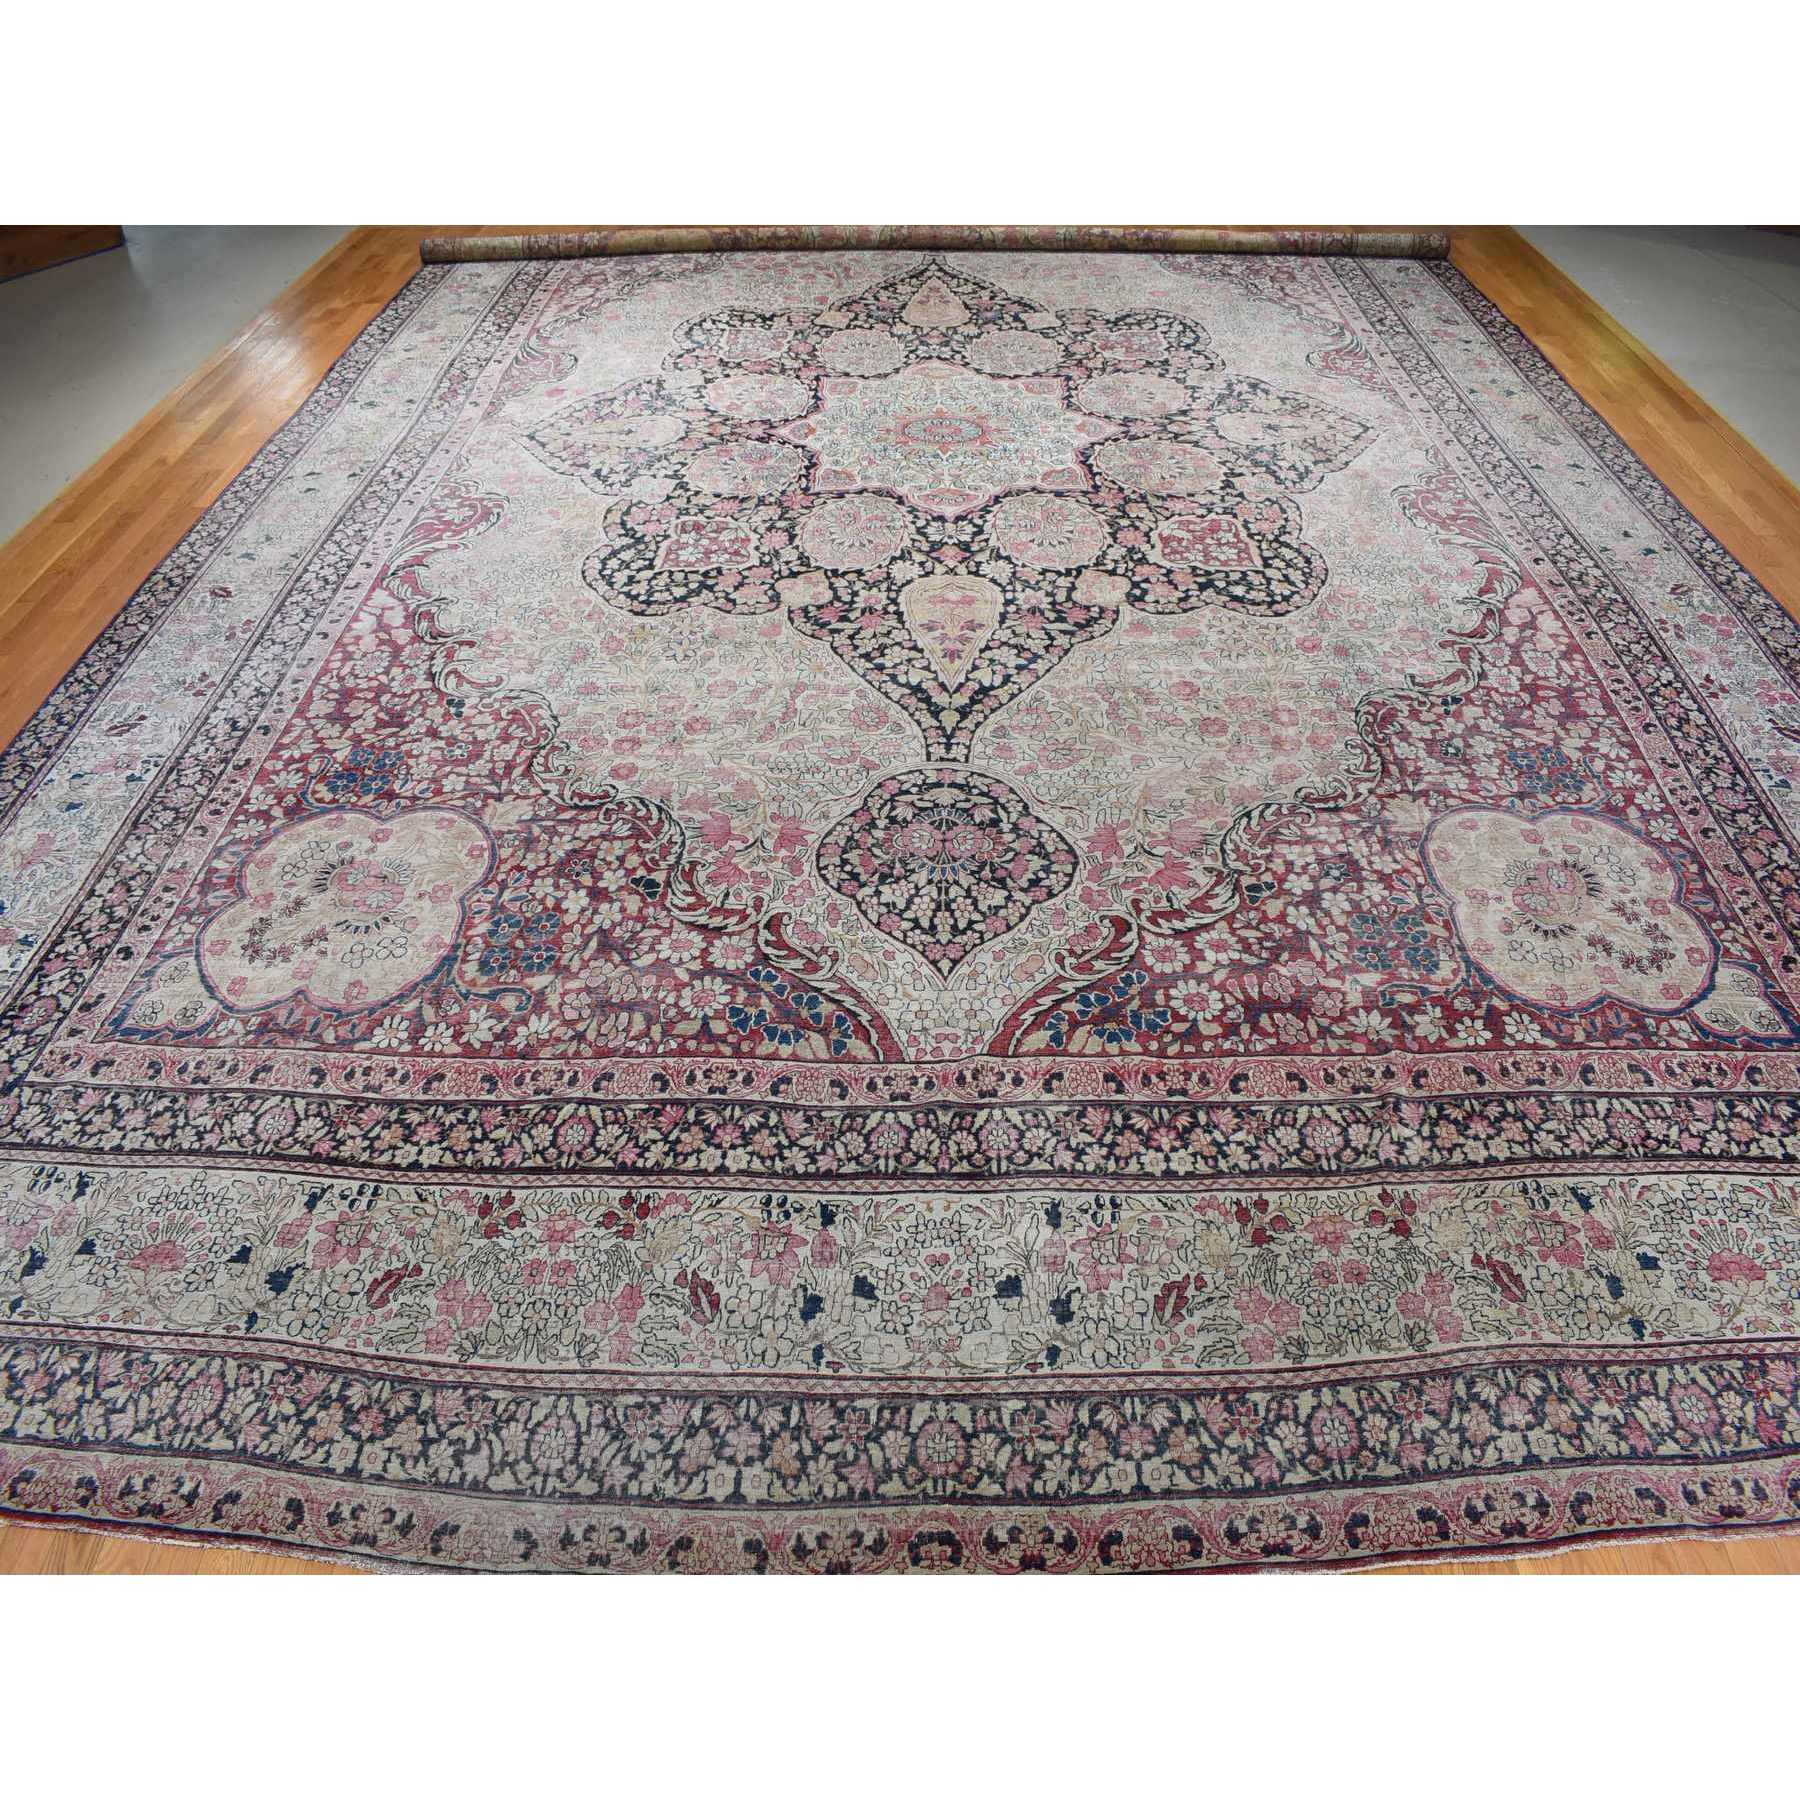 17'x26'3" Beige, Antique Persian Lavar Kerman with Large Center Medallion, Pure Wool Hand Woven Natural Berries Dye Low Pile, Clean No Holes Evenly Worn, Palace Size Oriental Rug 